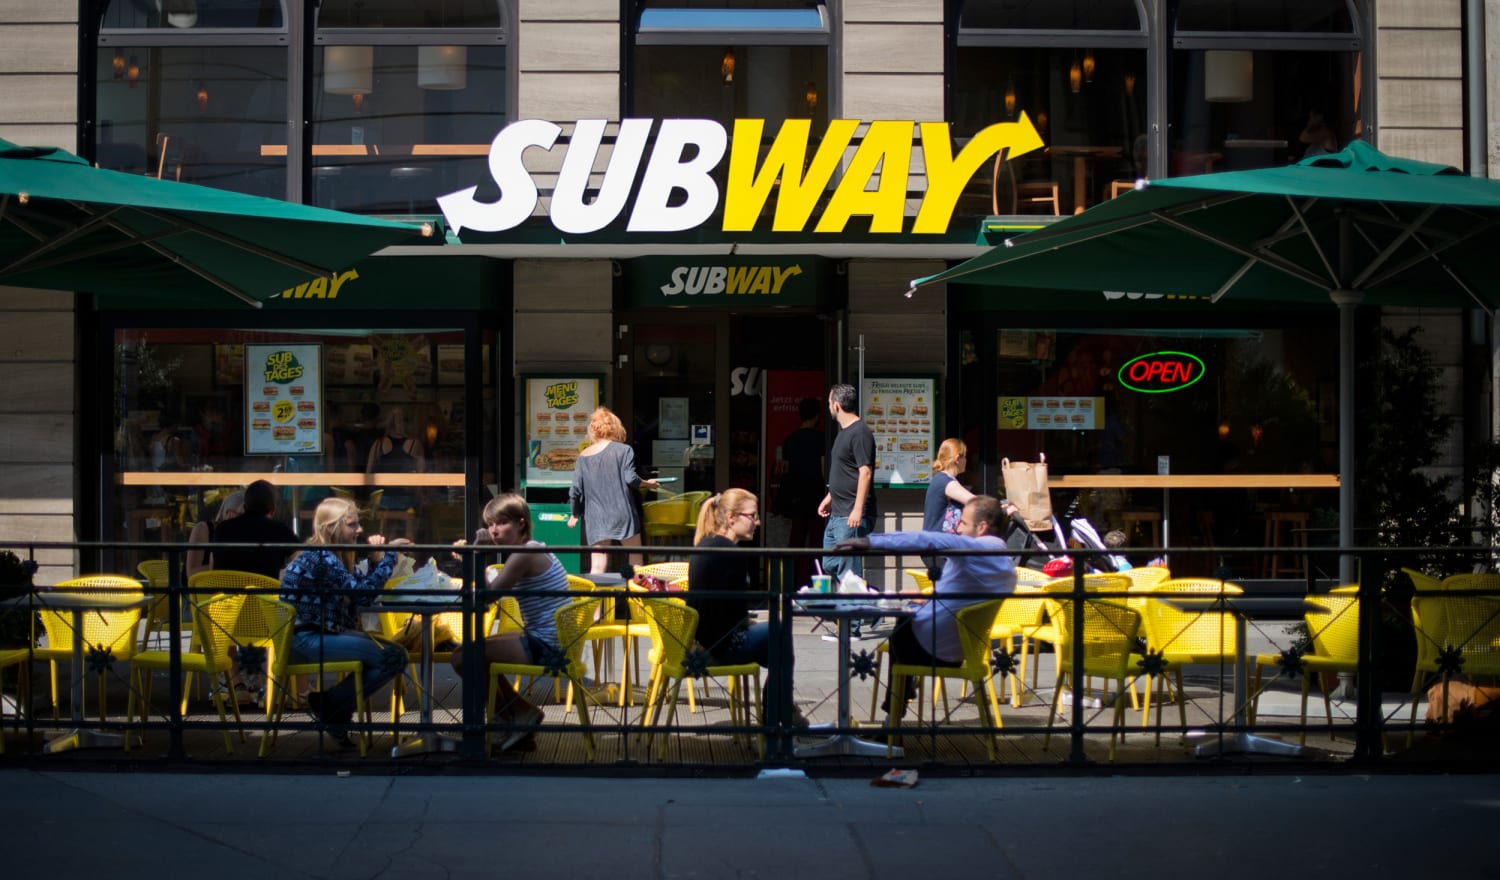 Subway: 10,000 people offered to legally change their name to